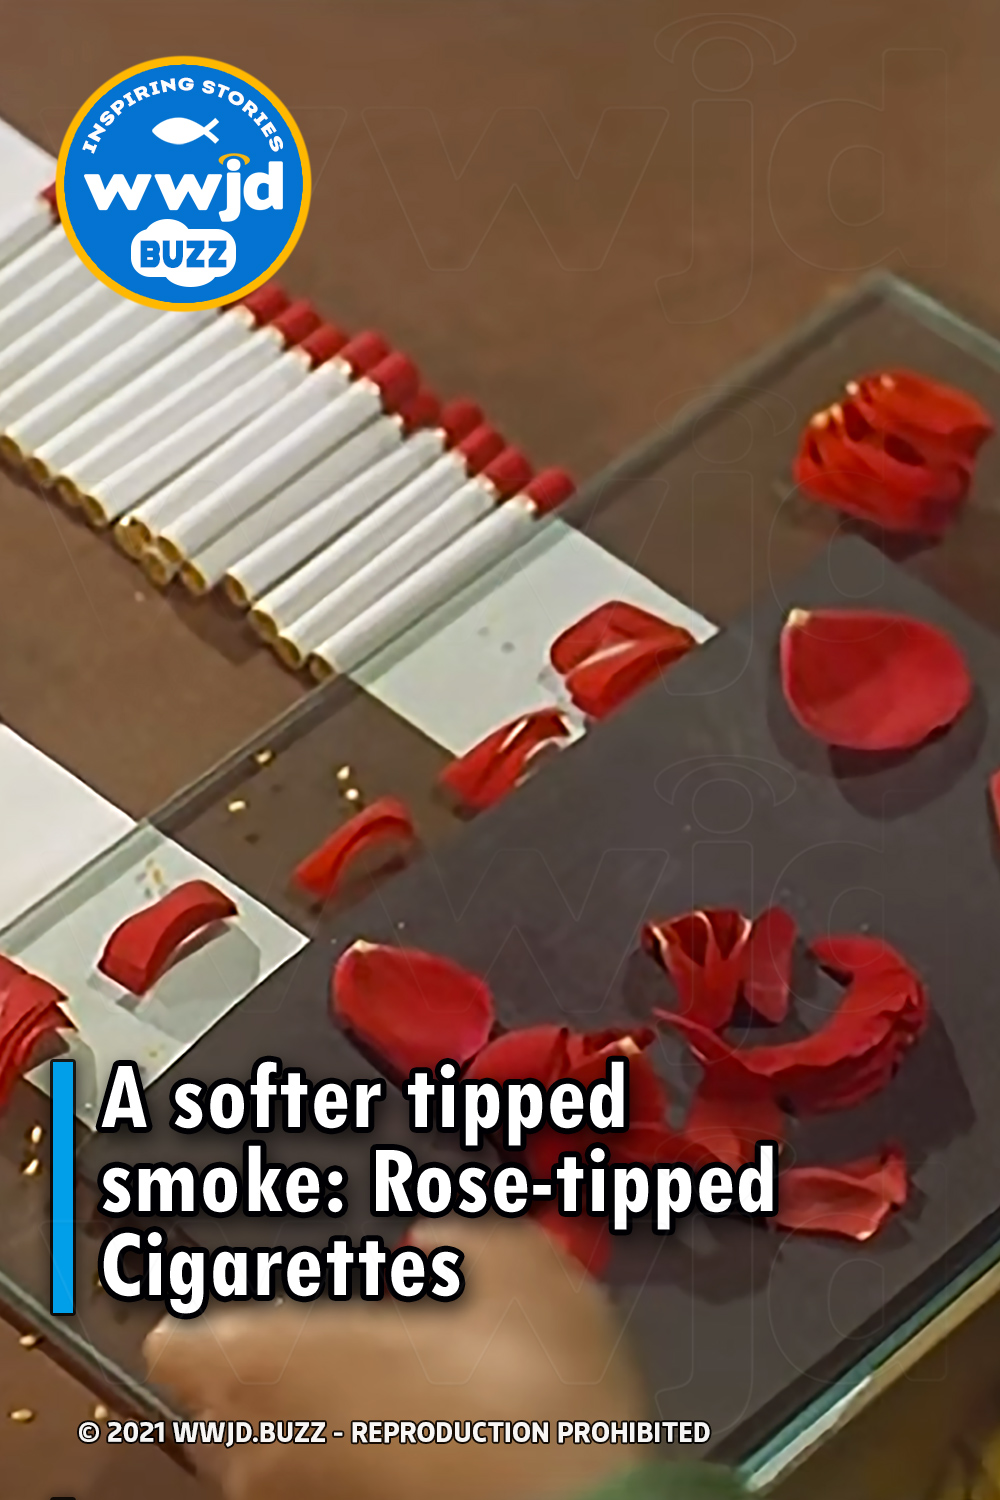 A softer tipped smoke: Rose-tipped Cigarettes